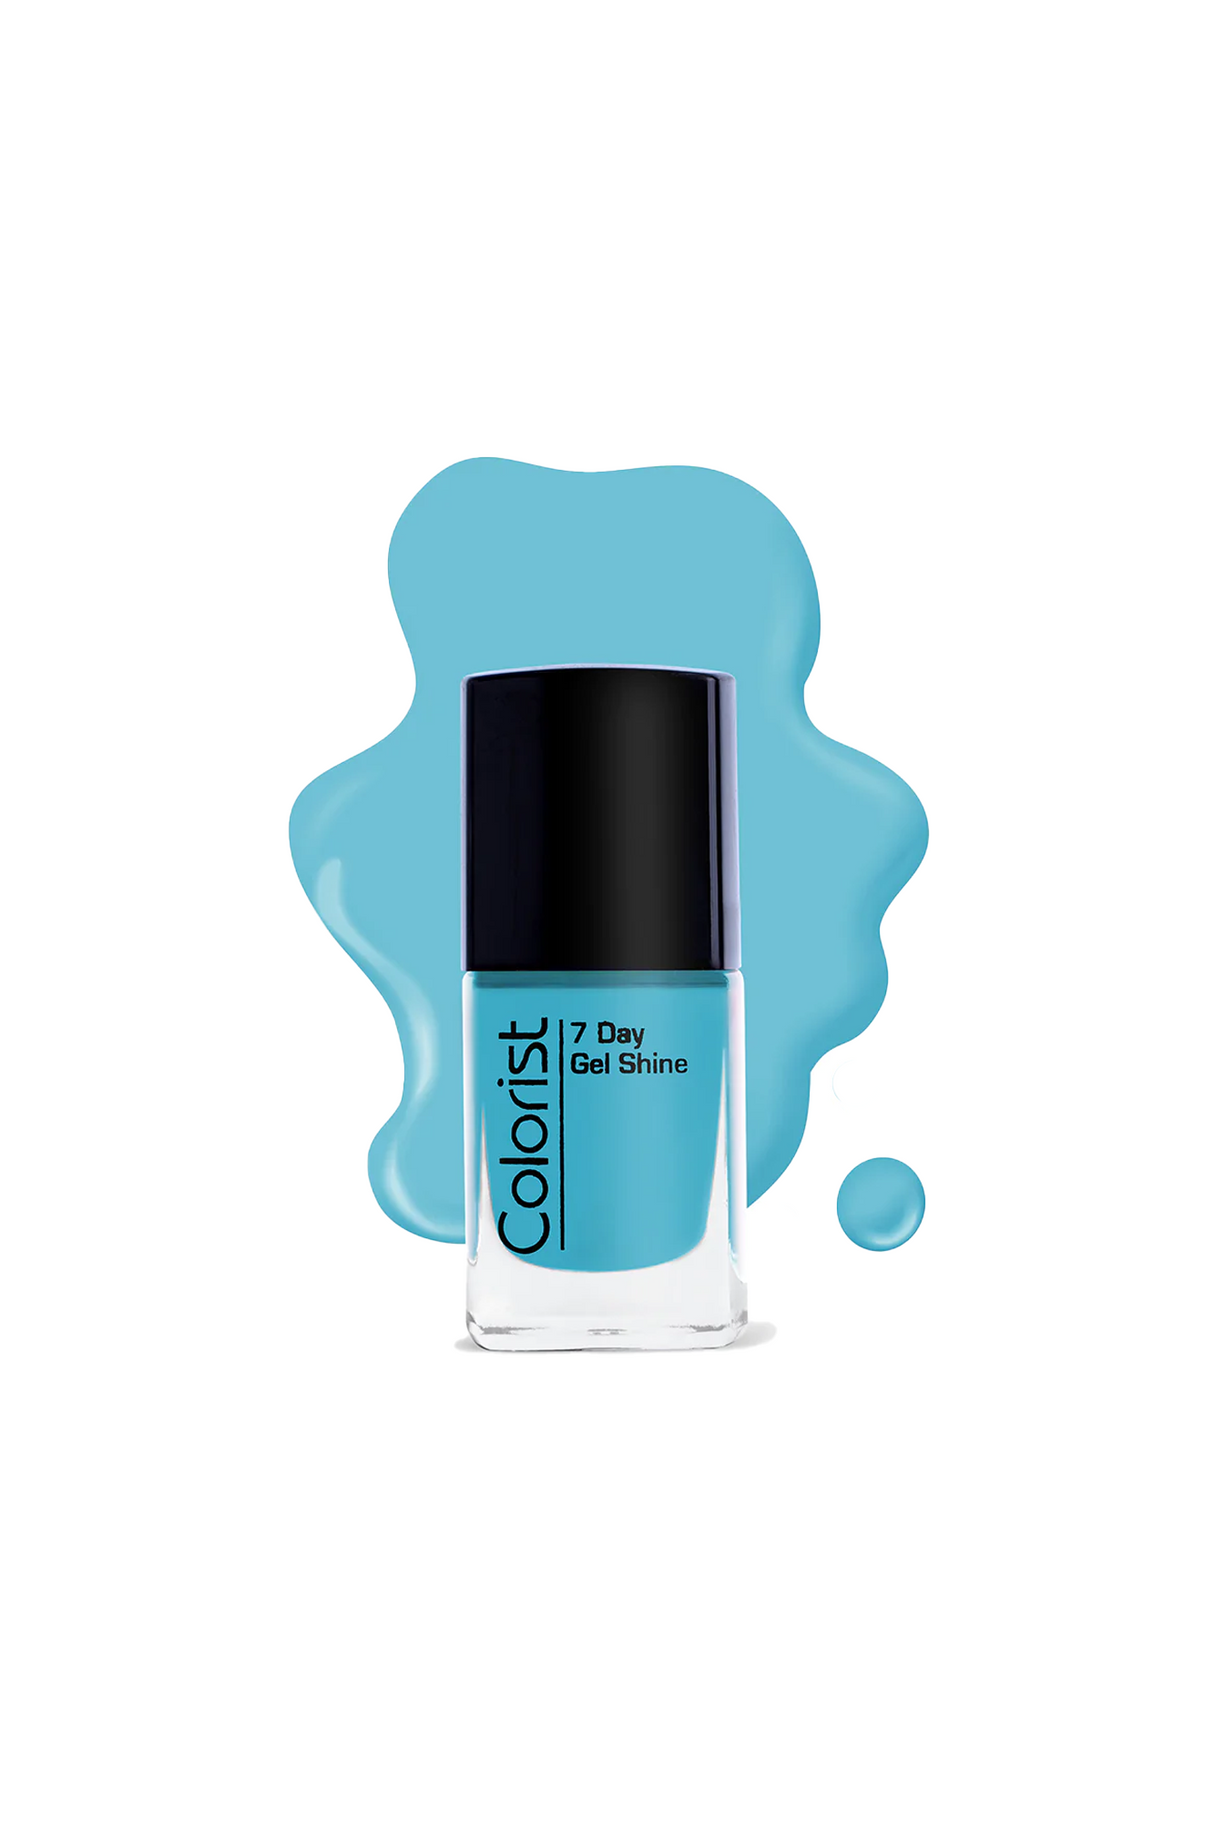 sweet touch nail polish colorist st068 12ml